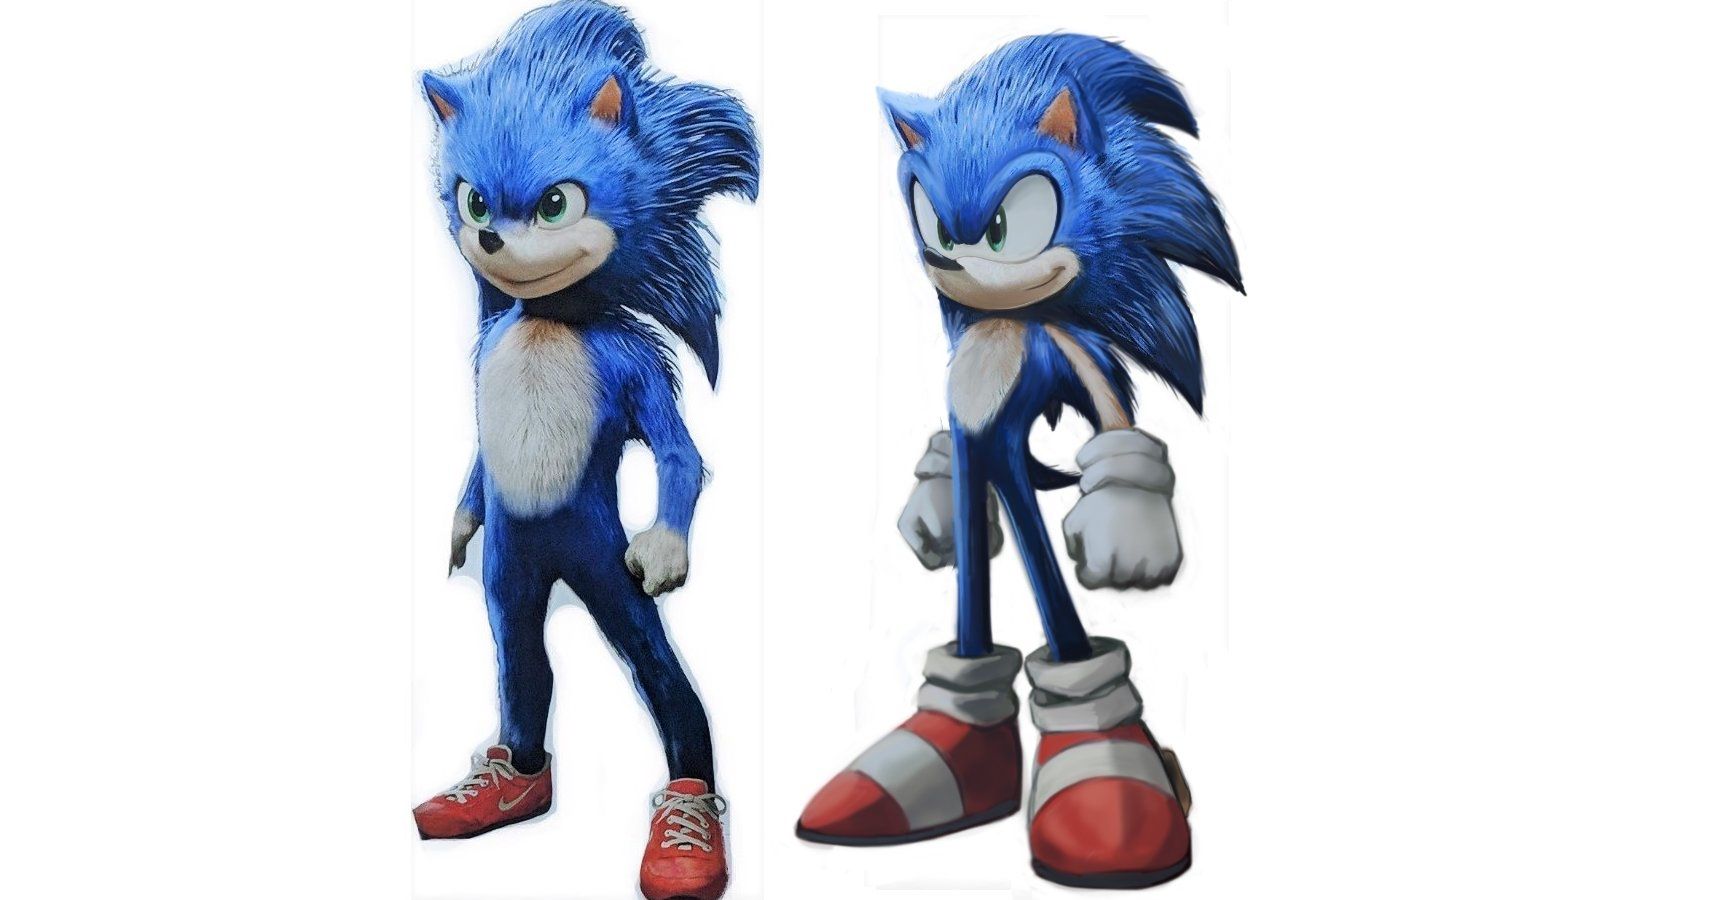 One is sonic here and one is trying to he sonic, not a Sino but maybe a Shi...